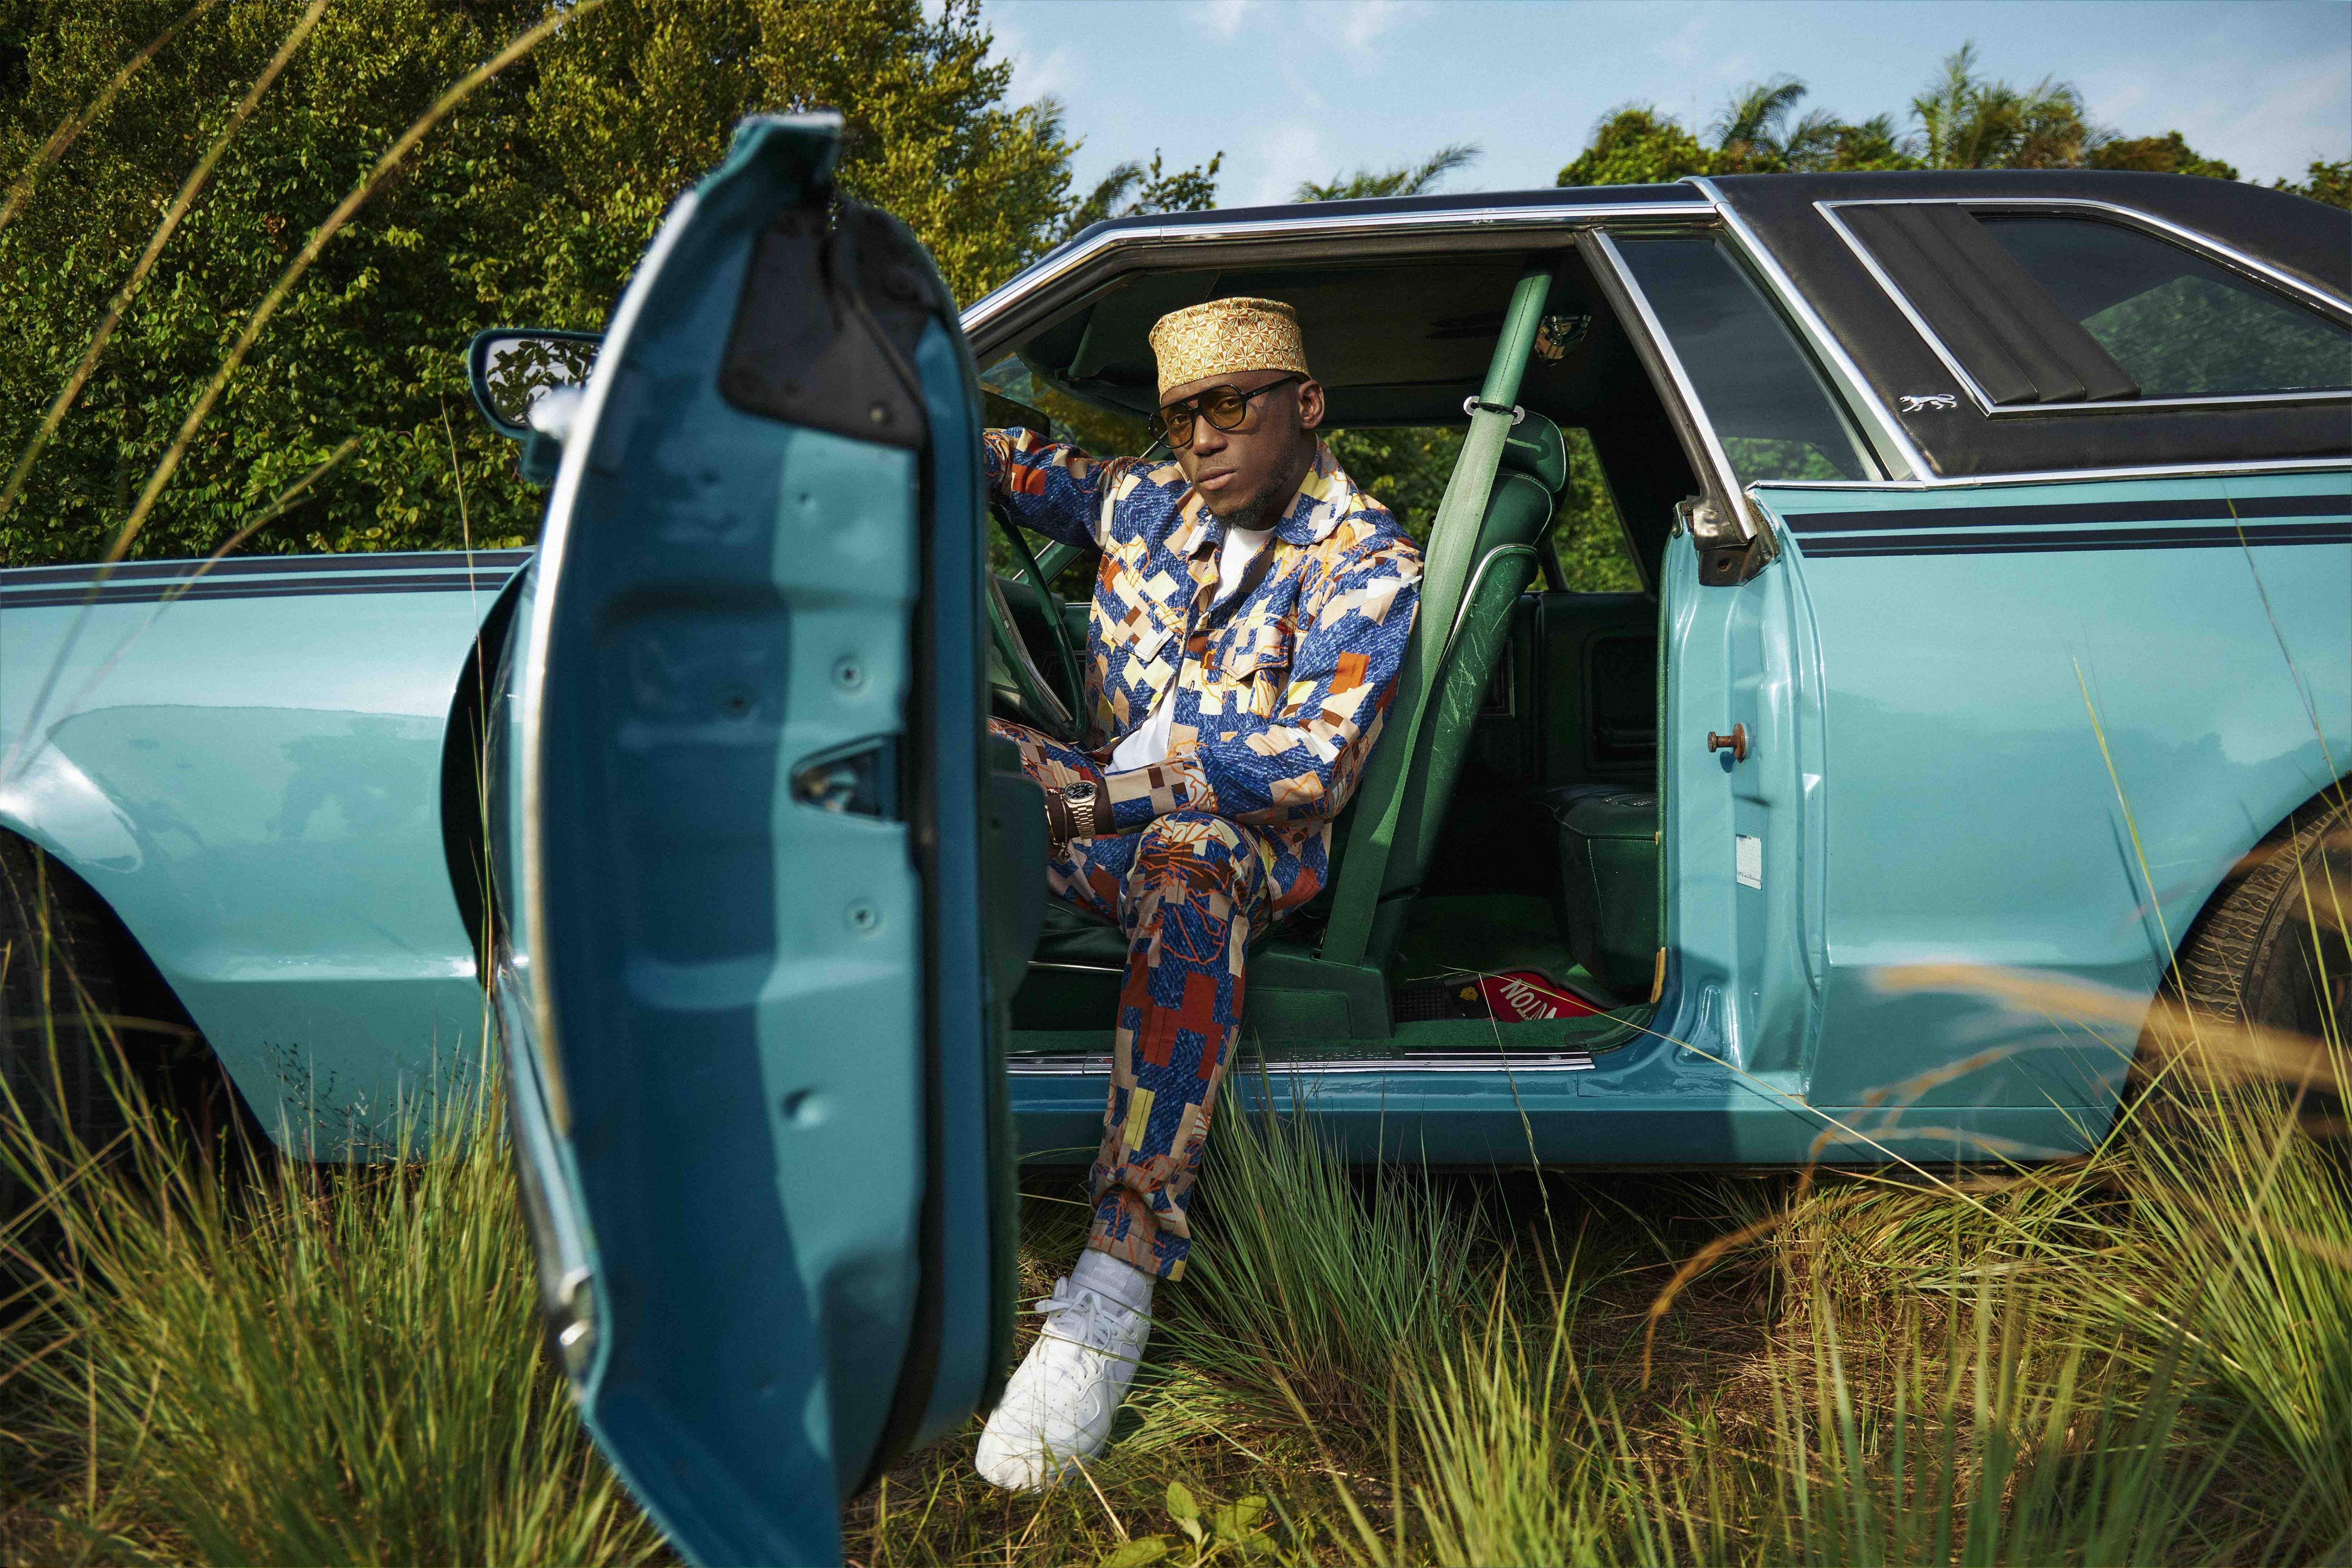 Spinall poses in a turquoise car parked in a grassy field